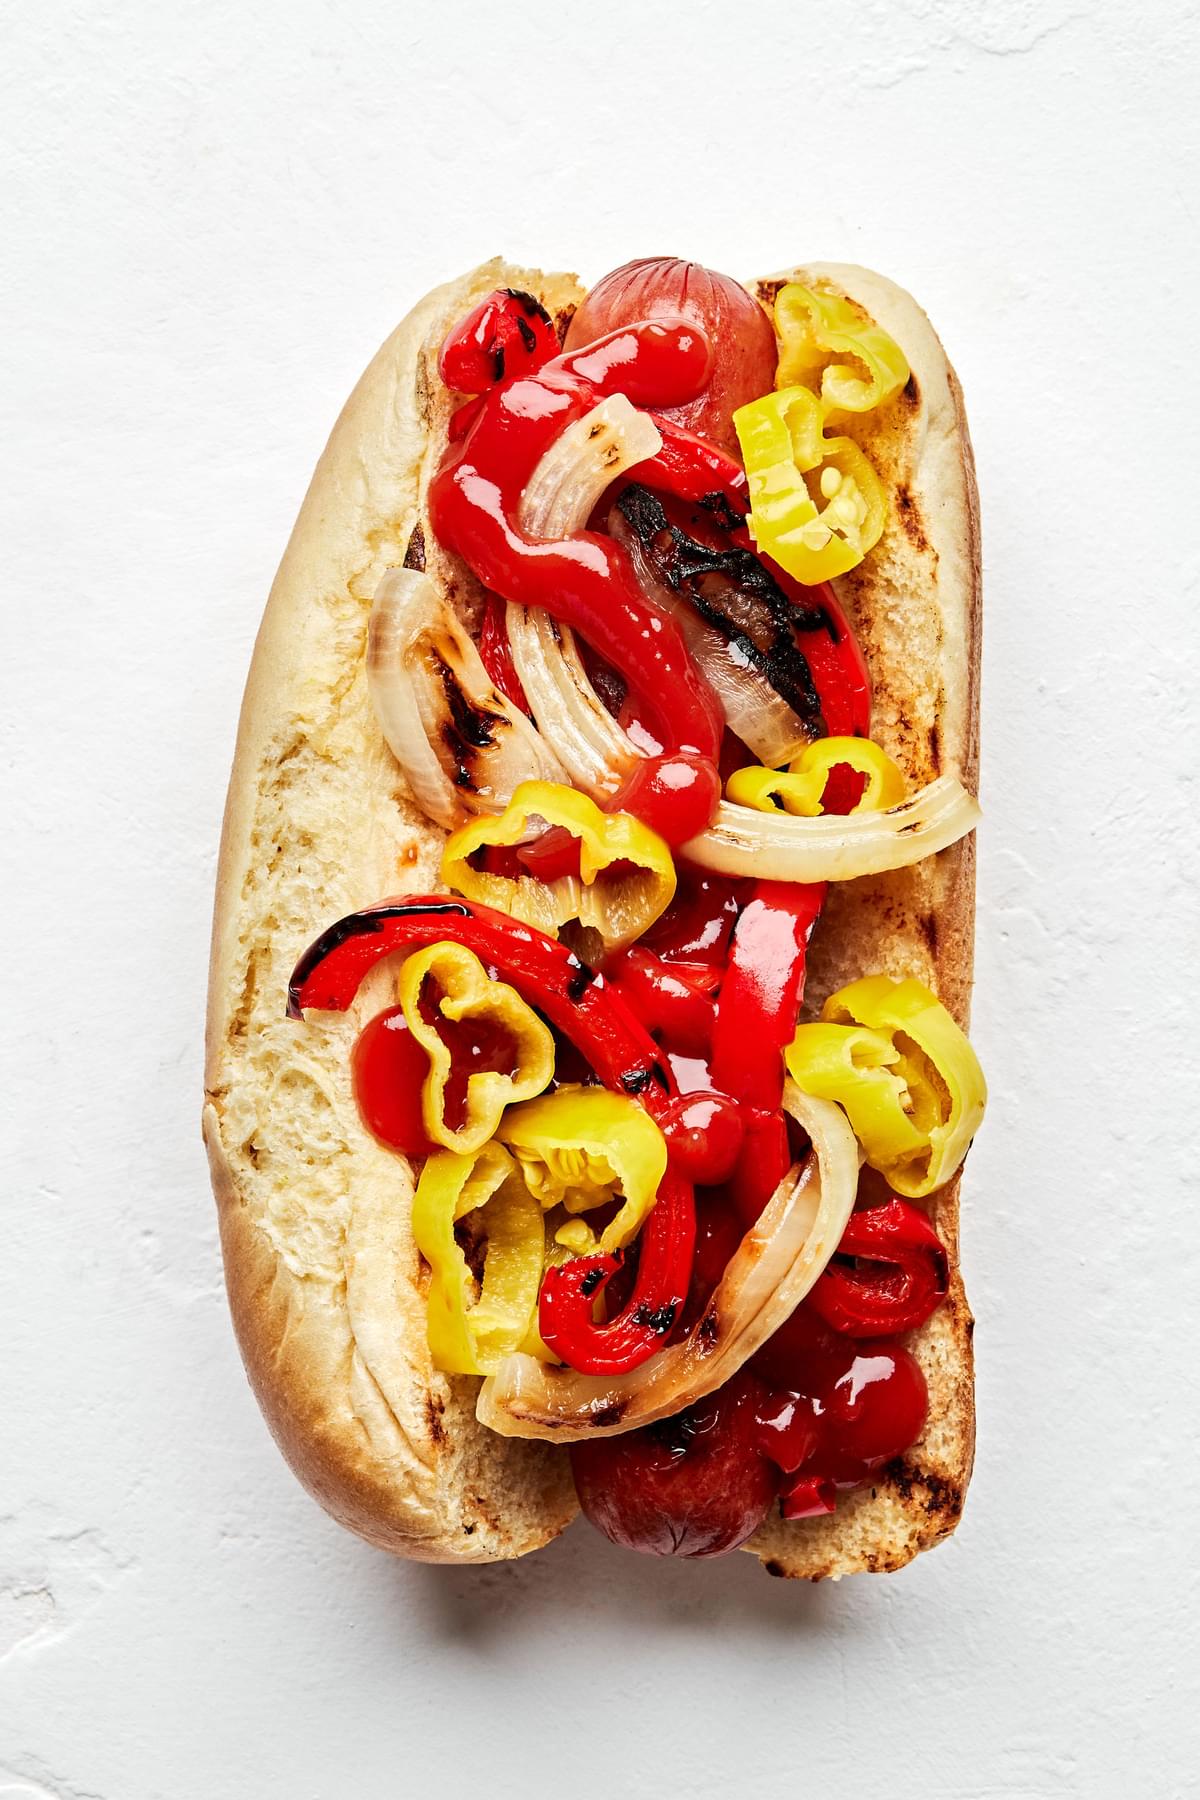 Italian-American hot dog topped with Grilled onions and bell peppers, ketchup, and pepperoncinis